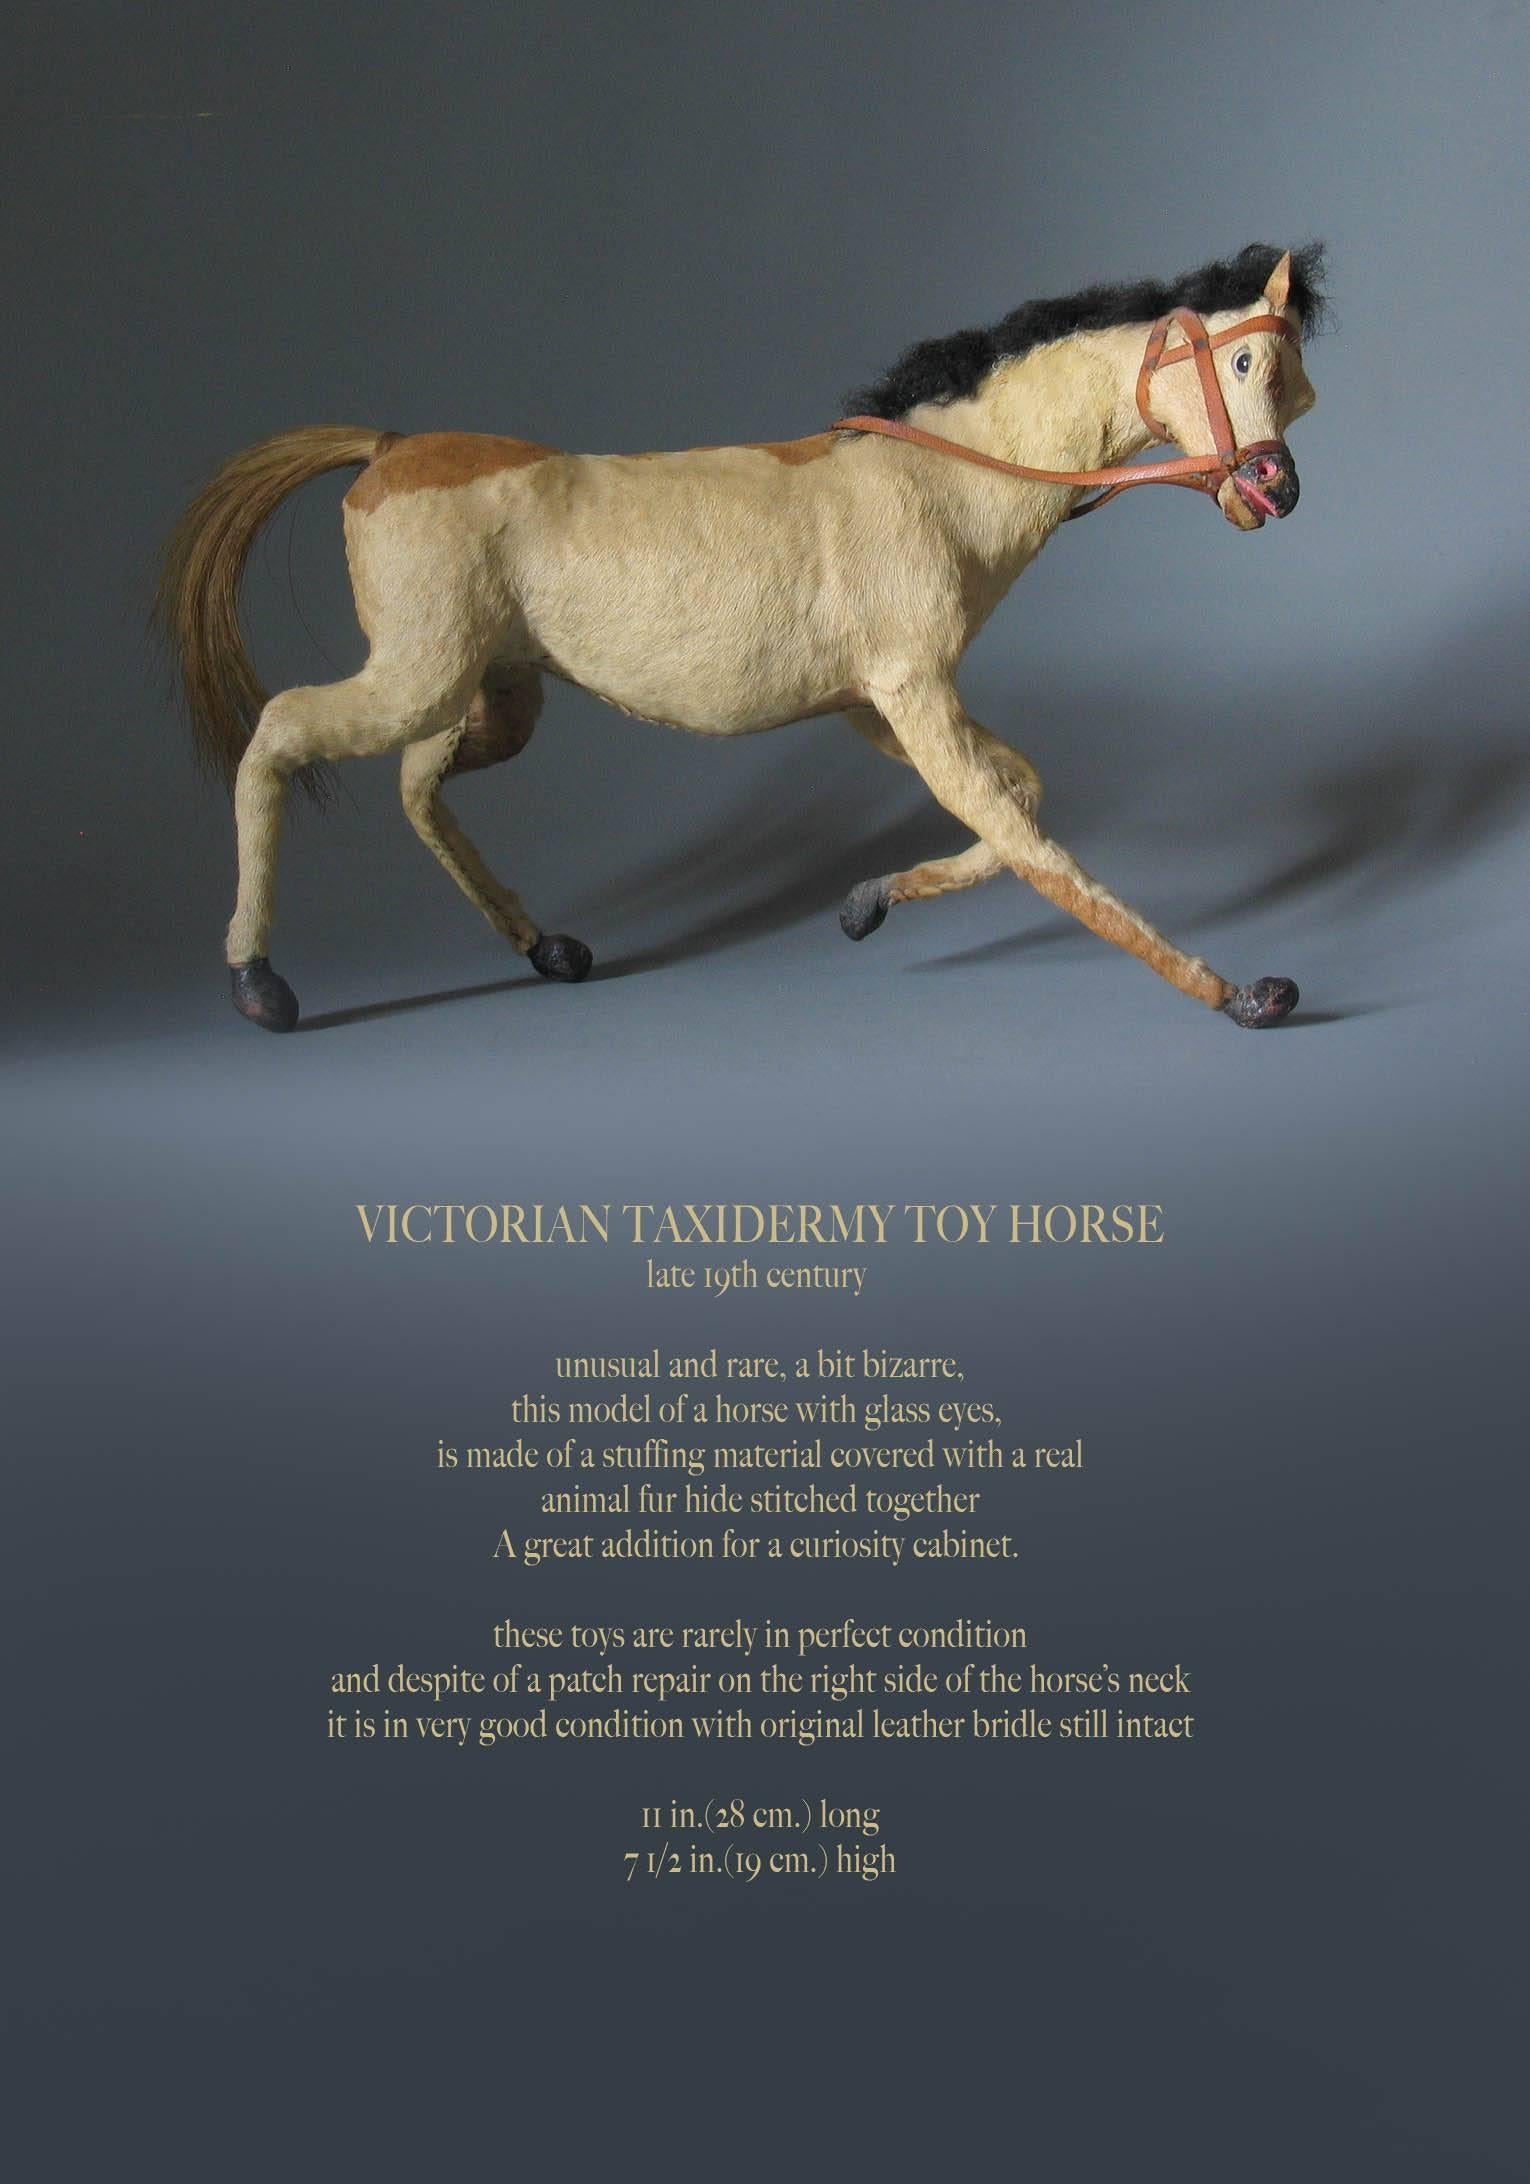 Victorian taxidermy toy horse, late 19th century.

Unusual and rare, a bit bizarre, this model of a horse with glass eyes, is made of a stuffing material covered with a real animal fur hide stitched together, A great addition for a curiosity